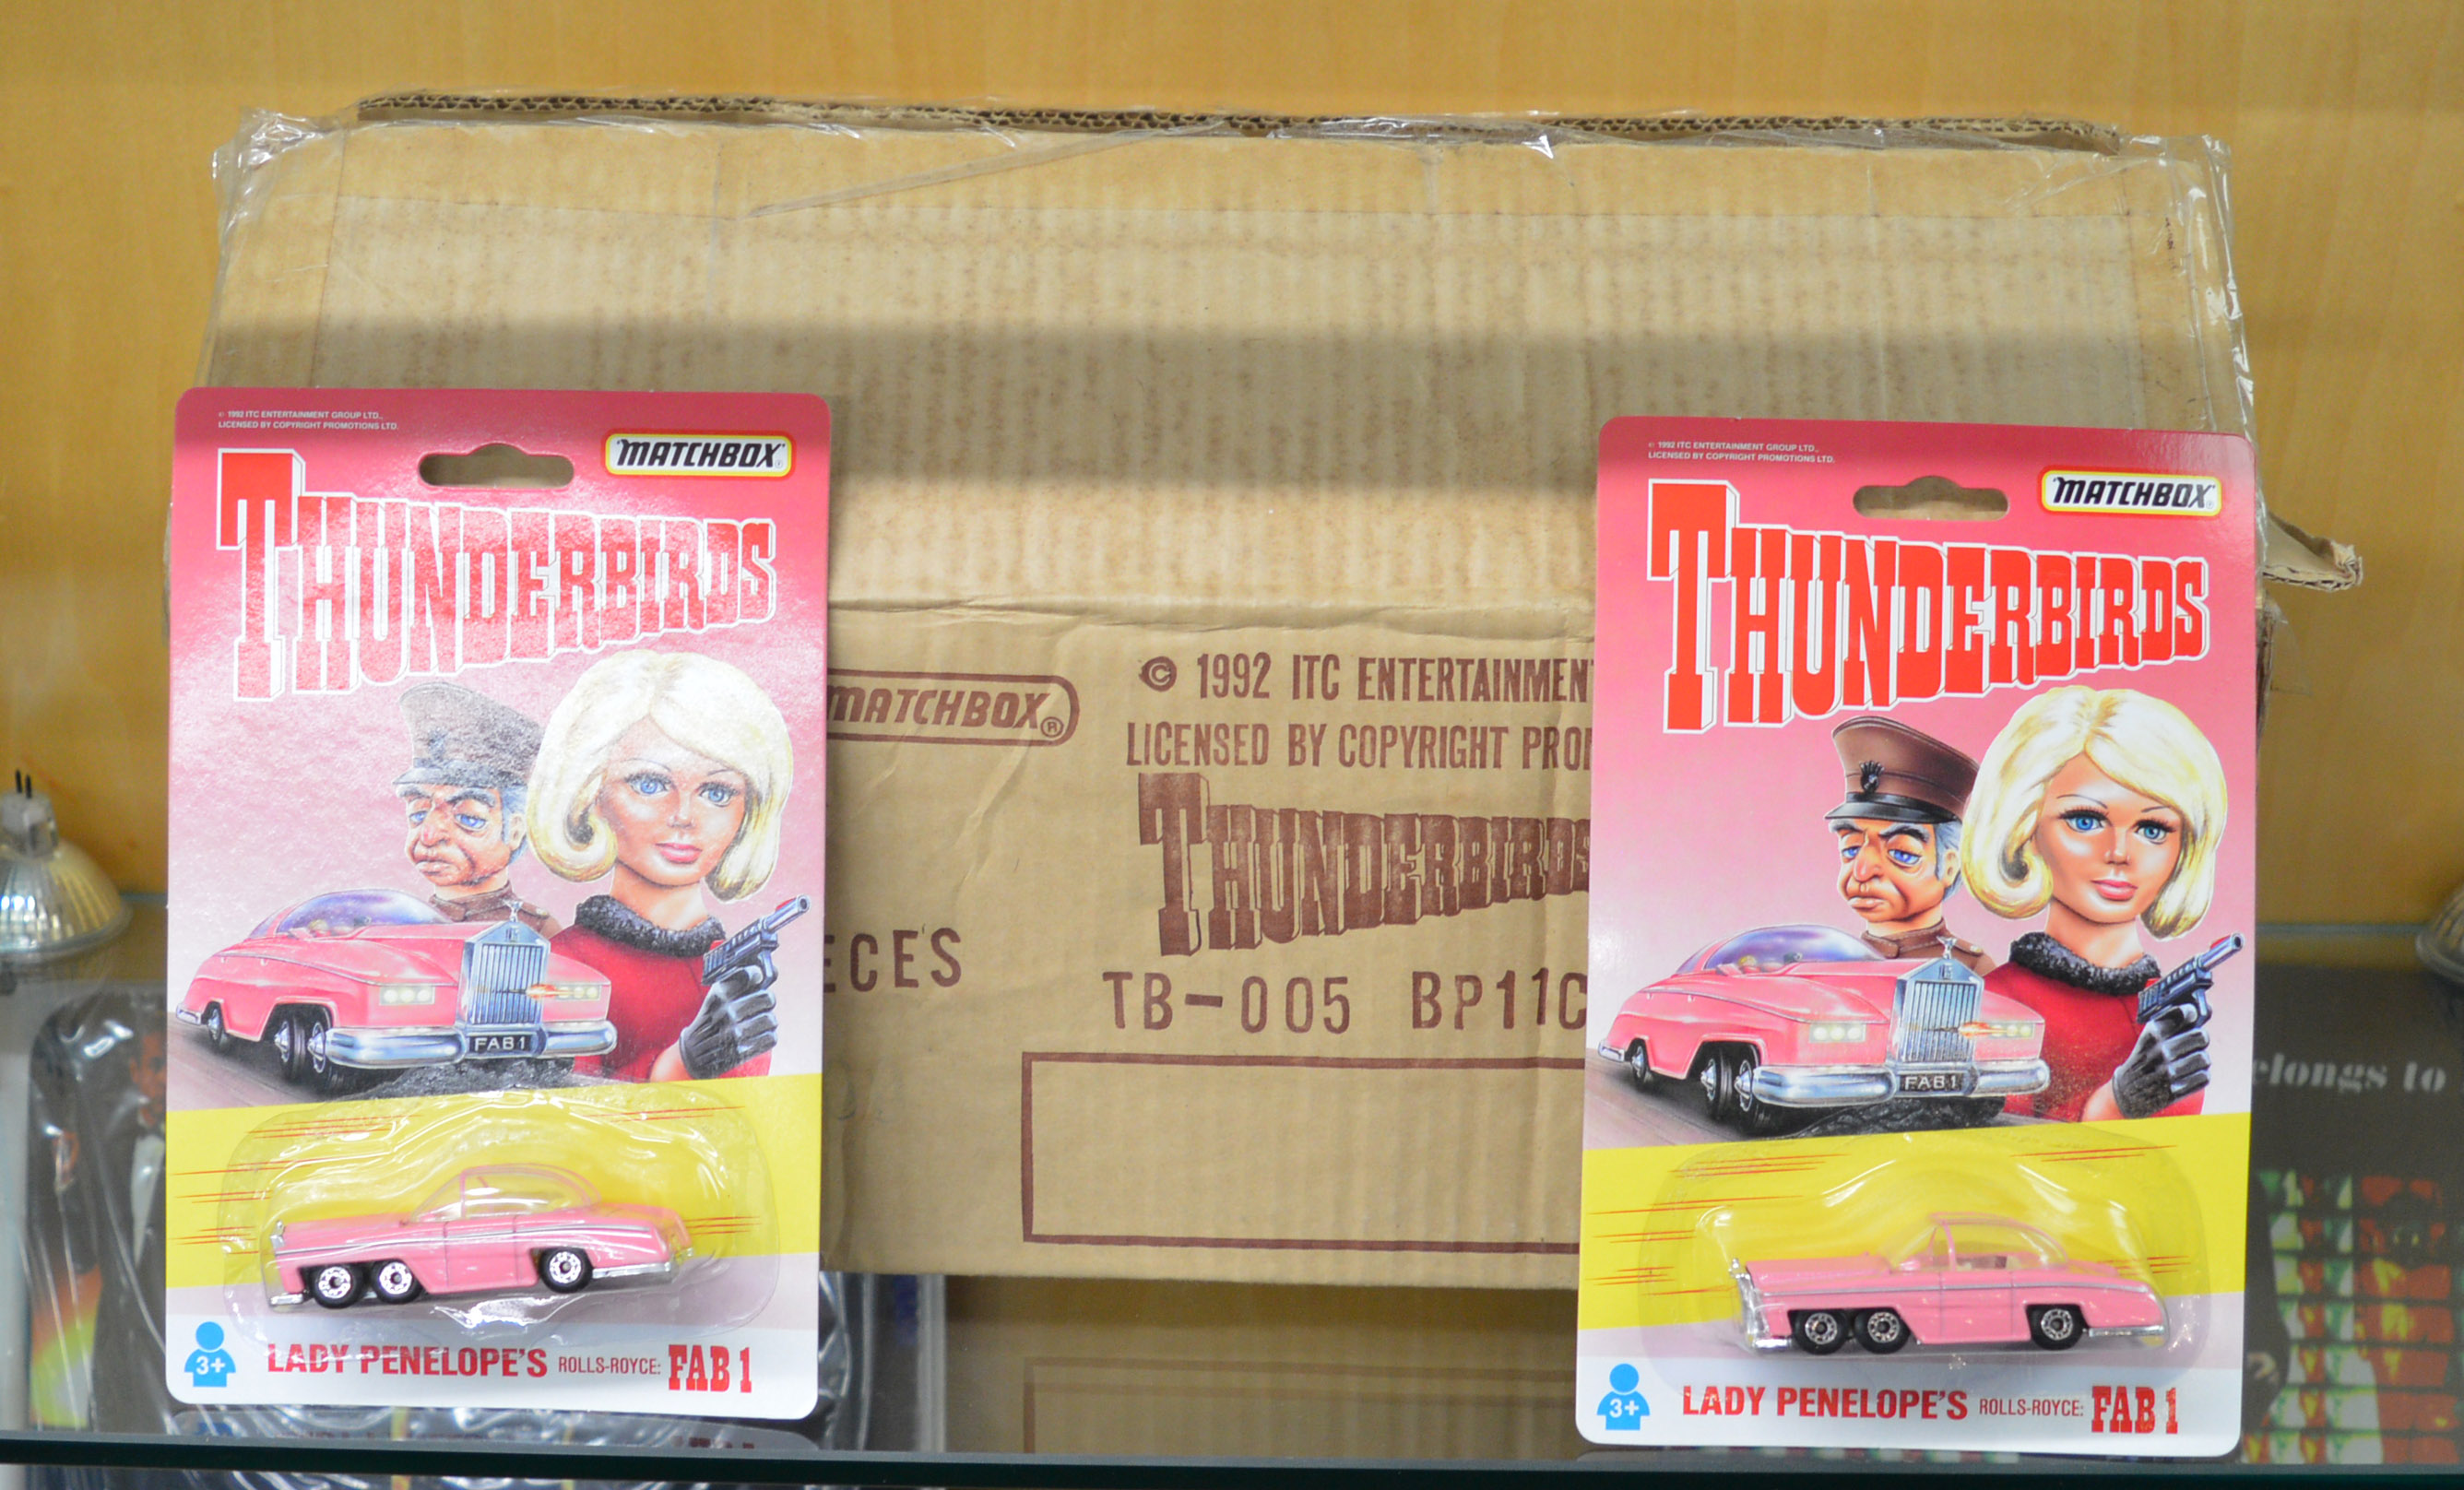 24 Lady Penelope's diecast models of Fab 1 from Thunderbirds by Matchbox (24).  [NO  RESERVE]